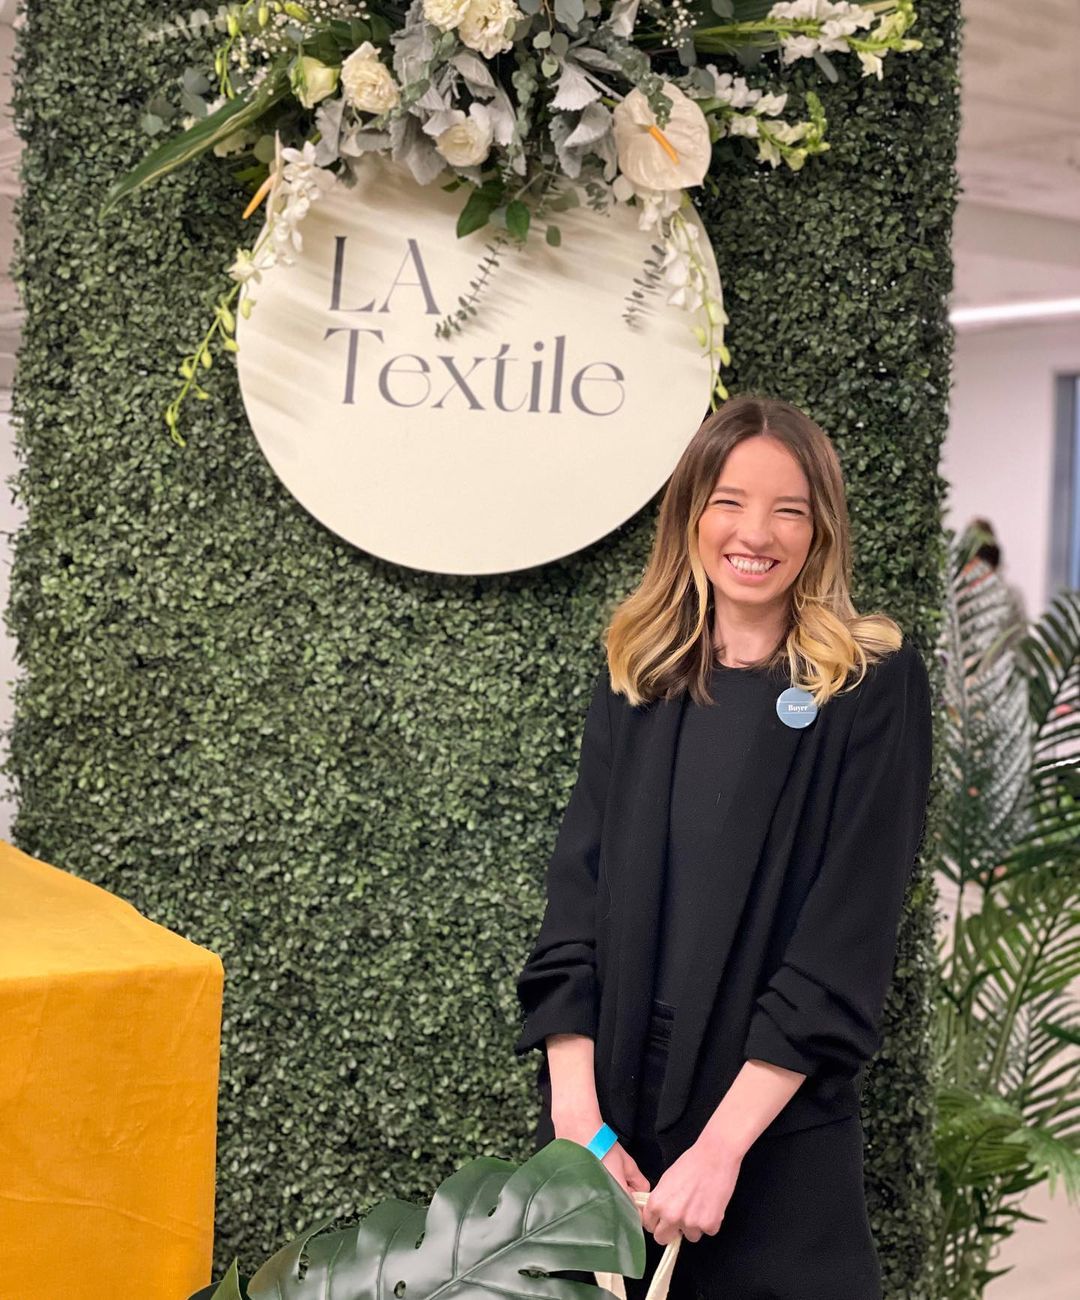 Fashion designer Lovell Faye smiling in front of a sign that says LA Textile.